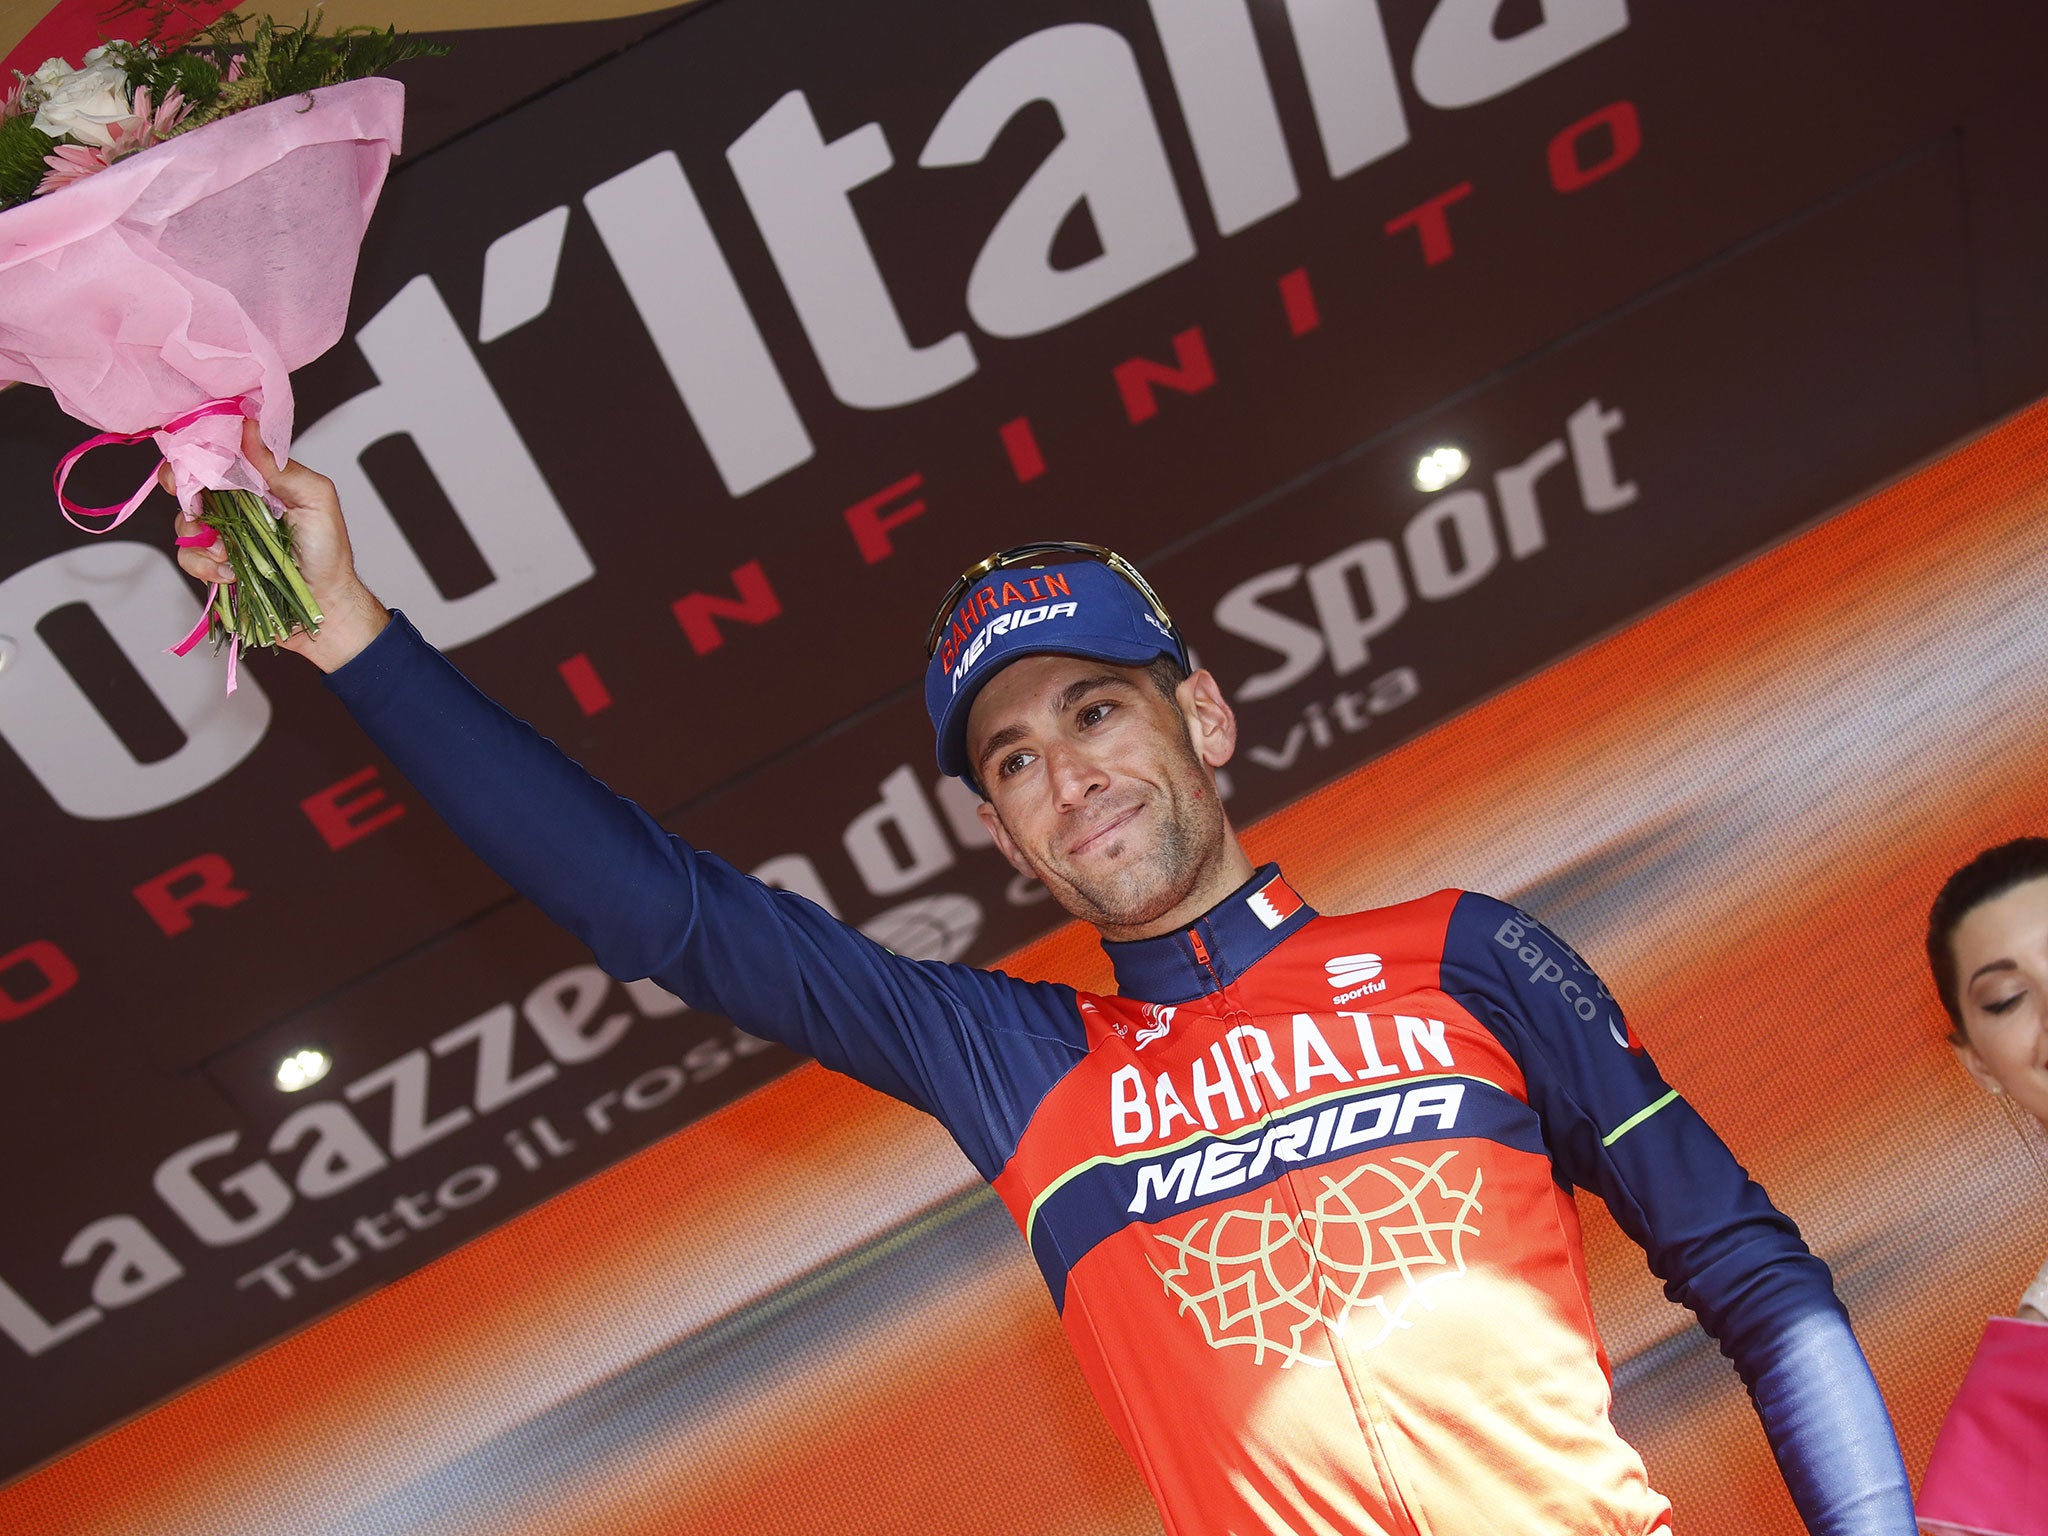 Vincenzo Nibali is one of the best all-round riders